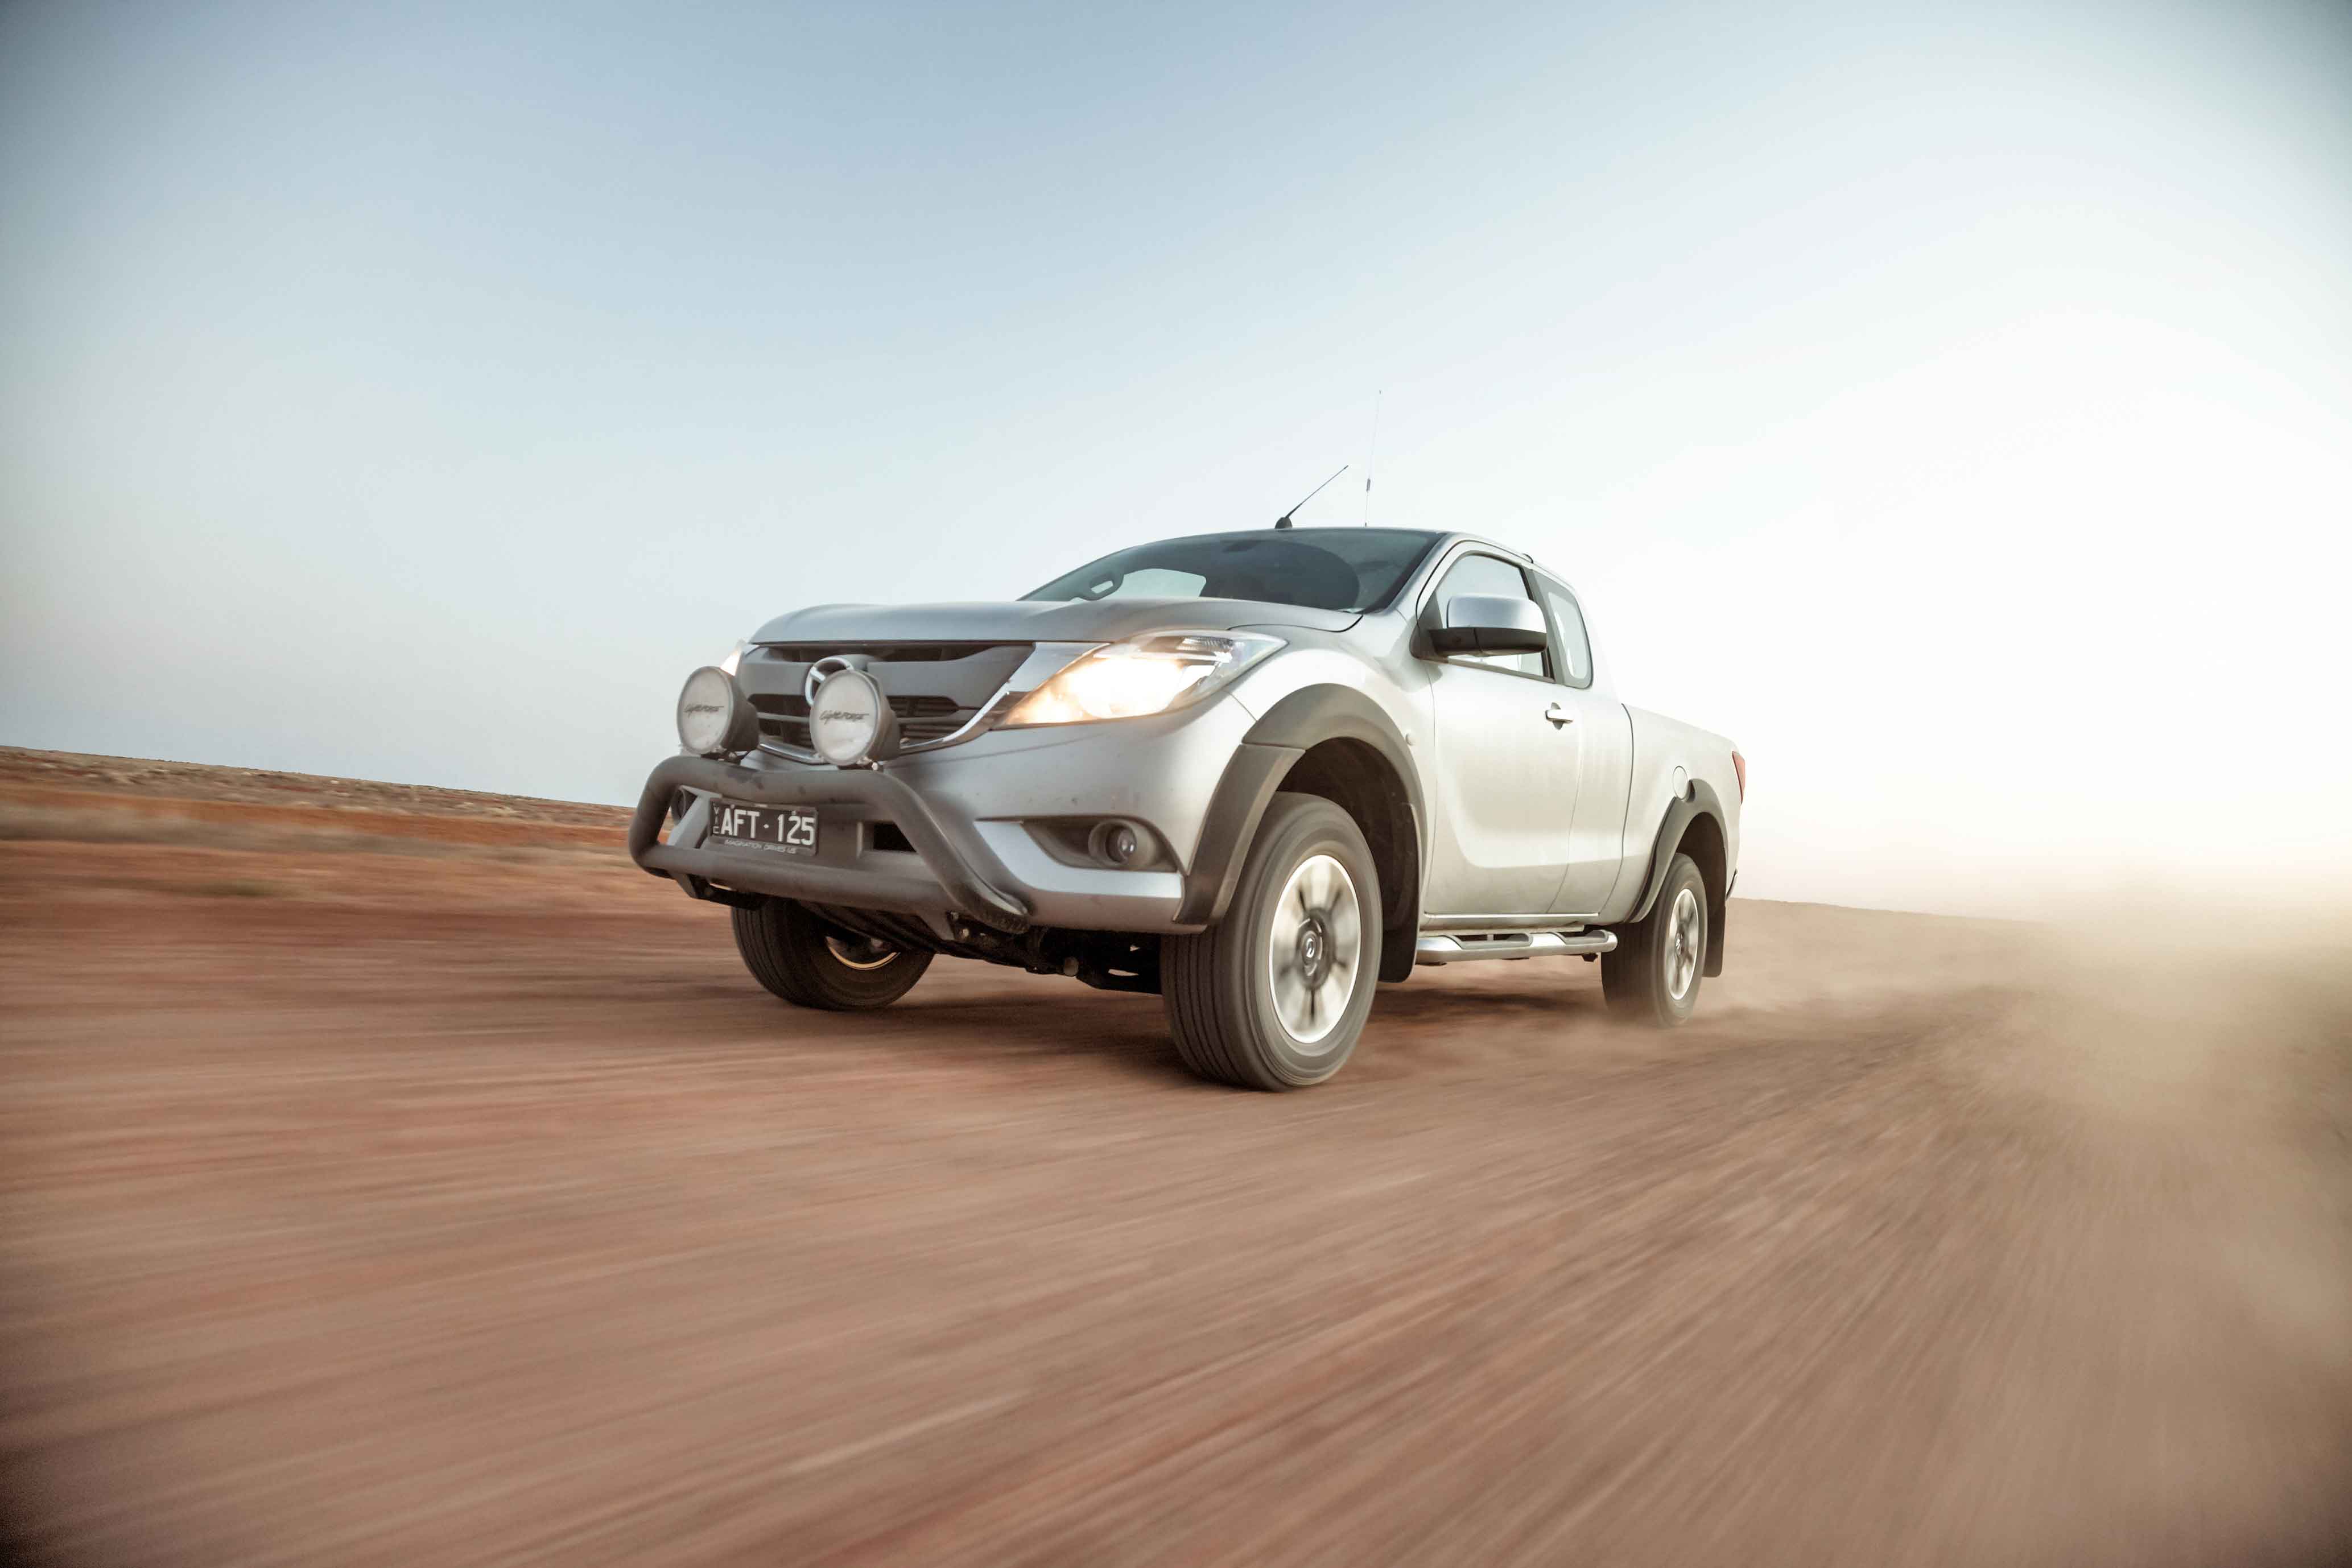 2016 Mazda BT-50 Review : Coober Pedy Off-Road Adventure ...